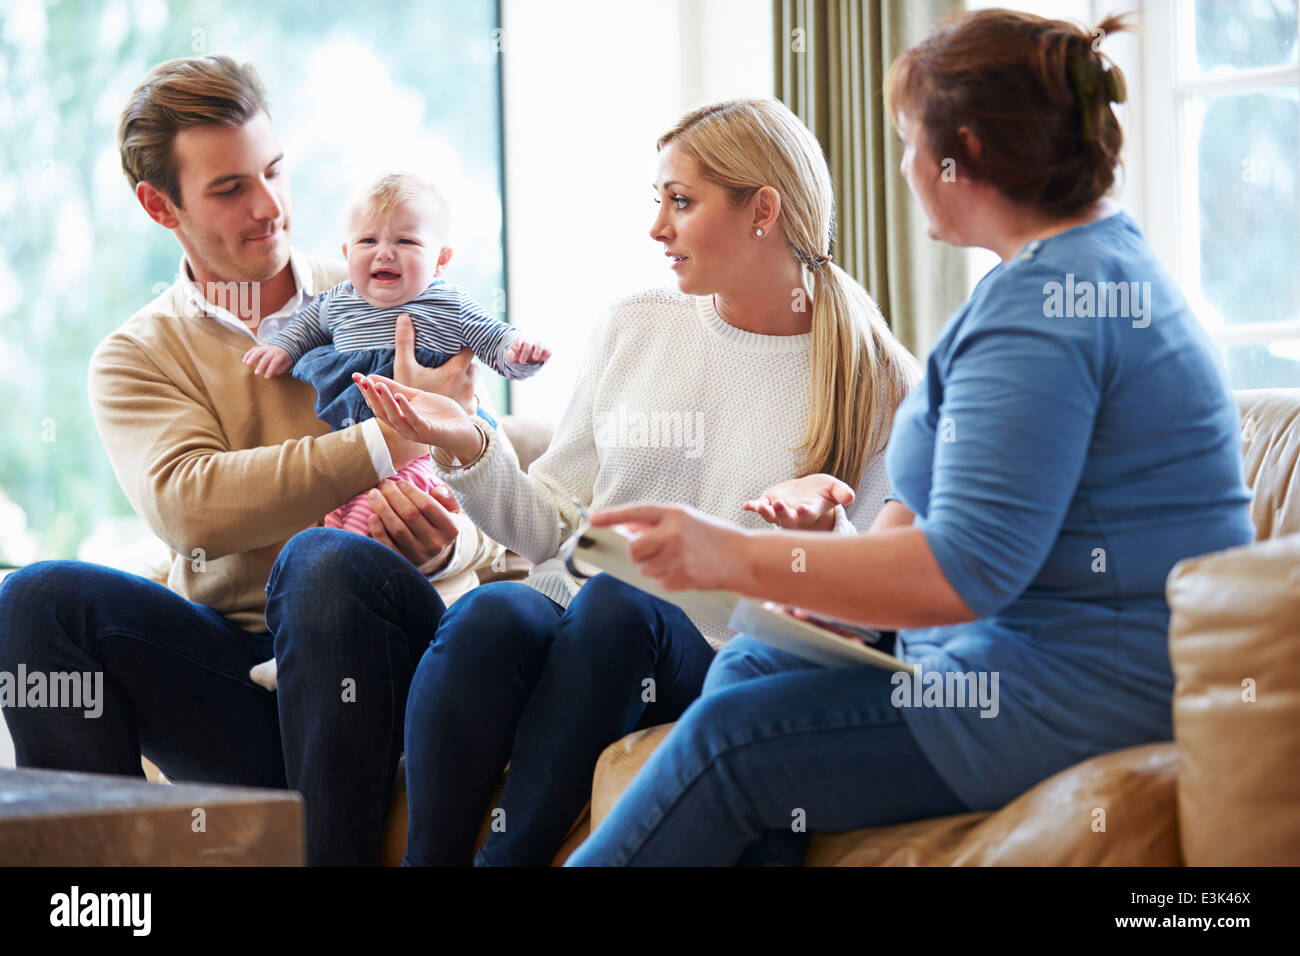 Social Worker Visiting Family With Young Baby Stock Photo